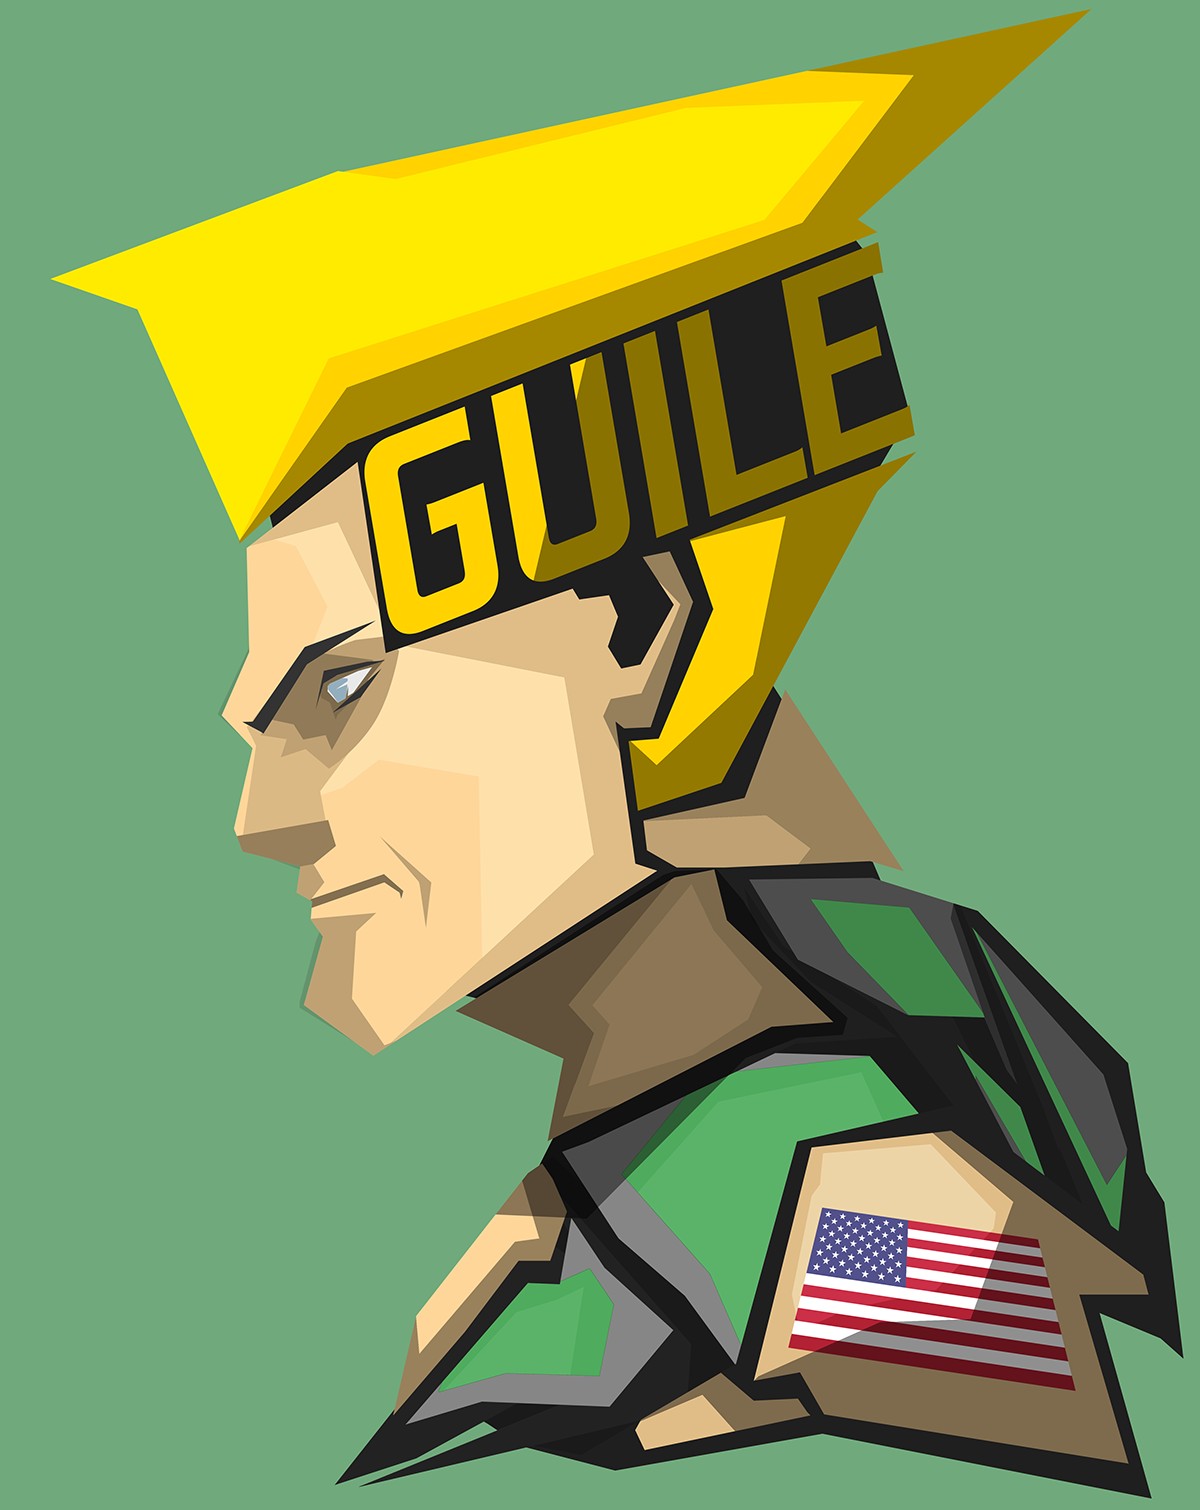 Guile (character), Street Fighter, Video games, Capcom, Green background Wallpaper